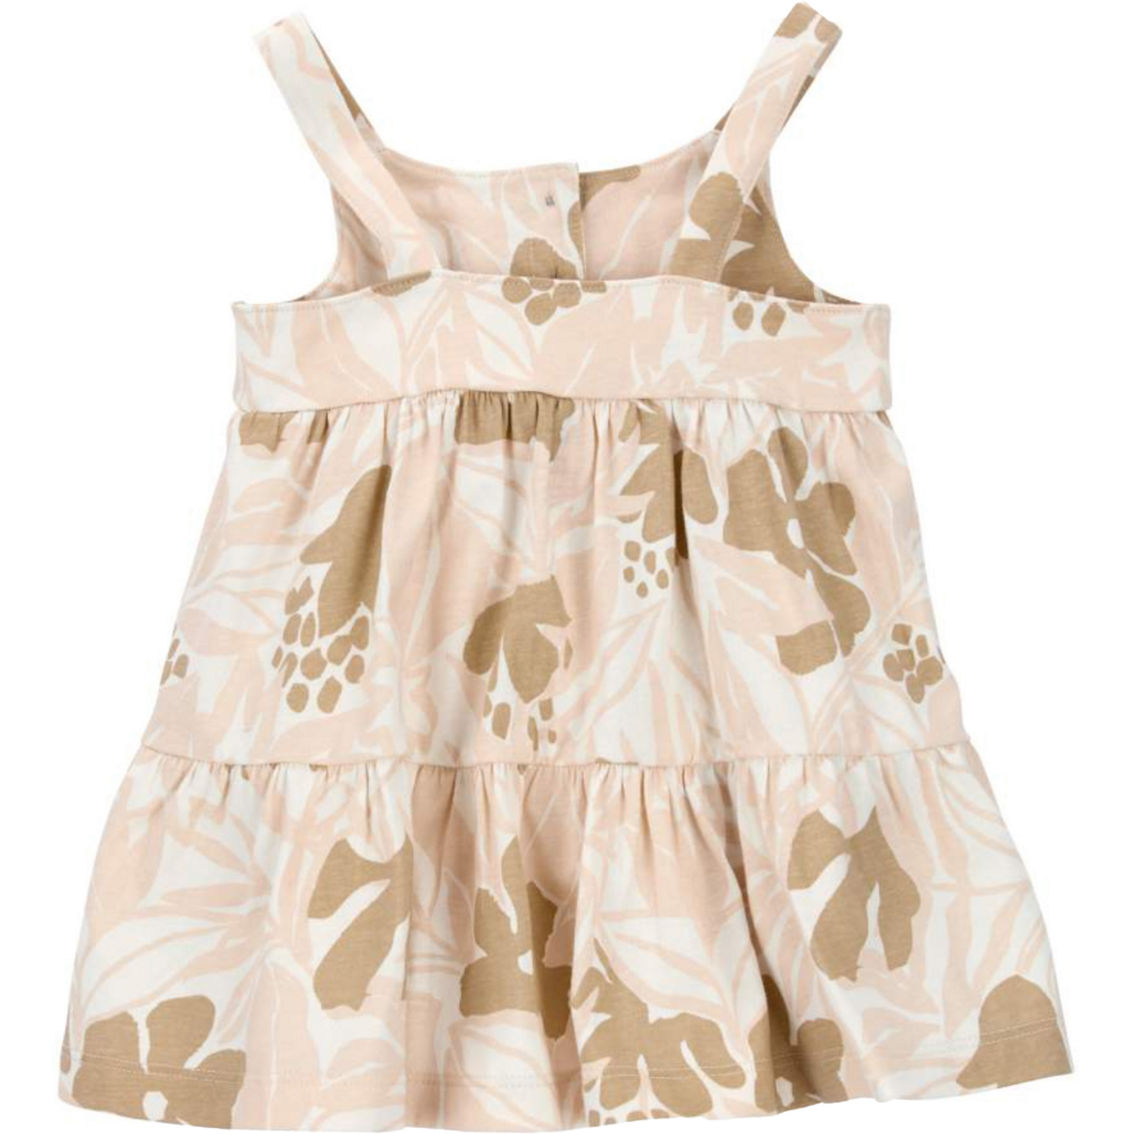 Carter's Baby Girls Floral Tank Dress - Image 2 of 3